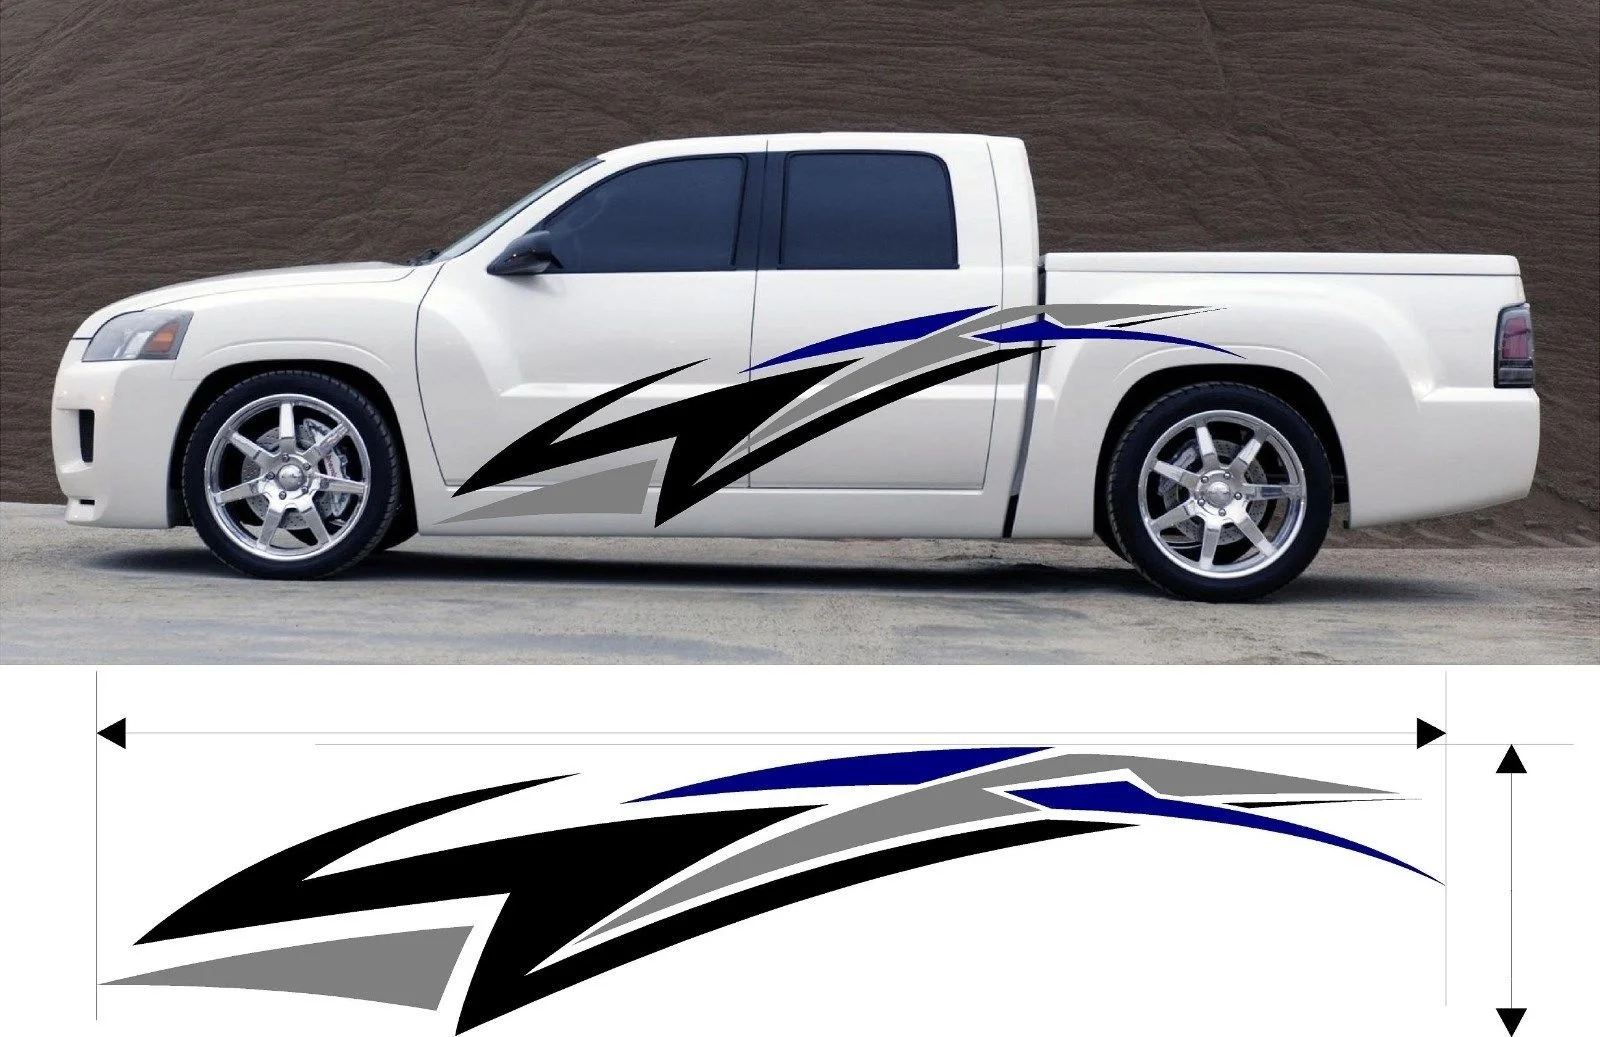 

For 2xVINYL GRAPHIC DECAL CAR TRUCK BOAT KIT CUSTOM SIZE COLOR VARIATION Car styling